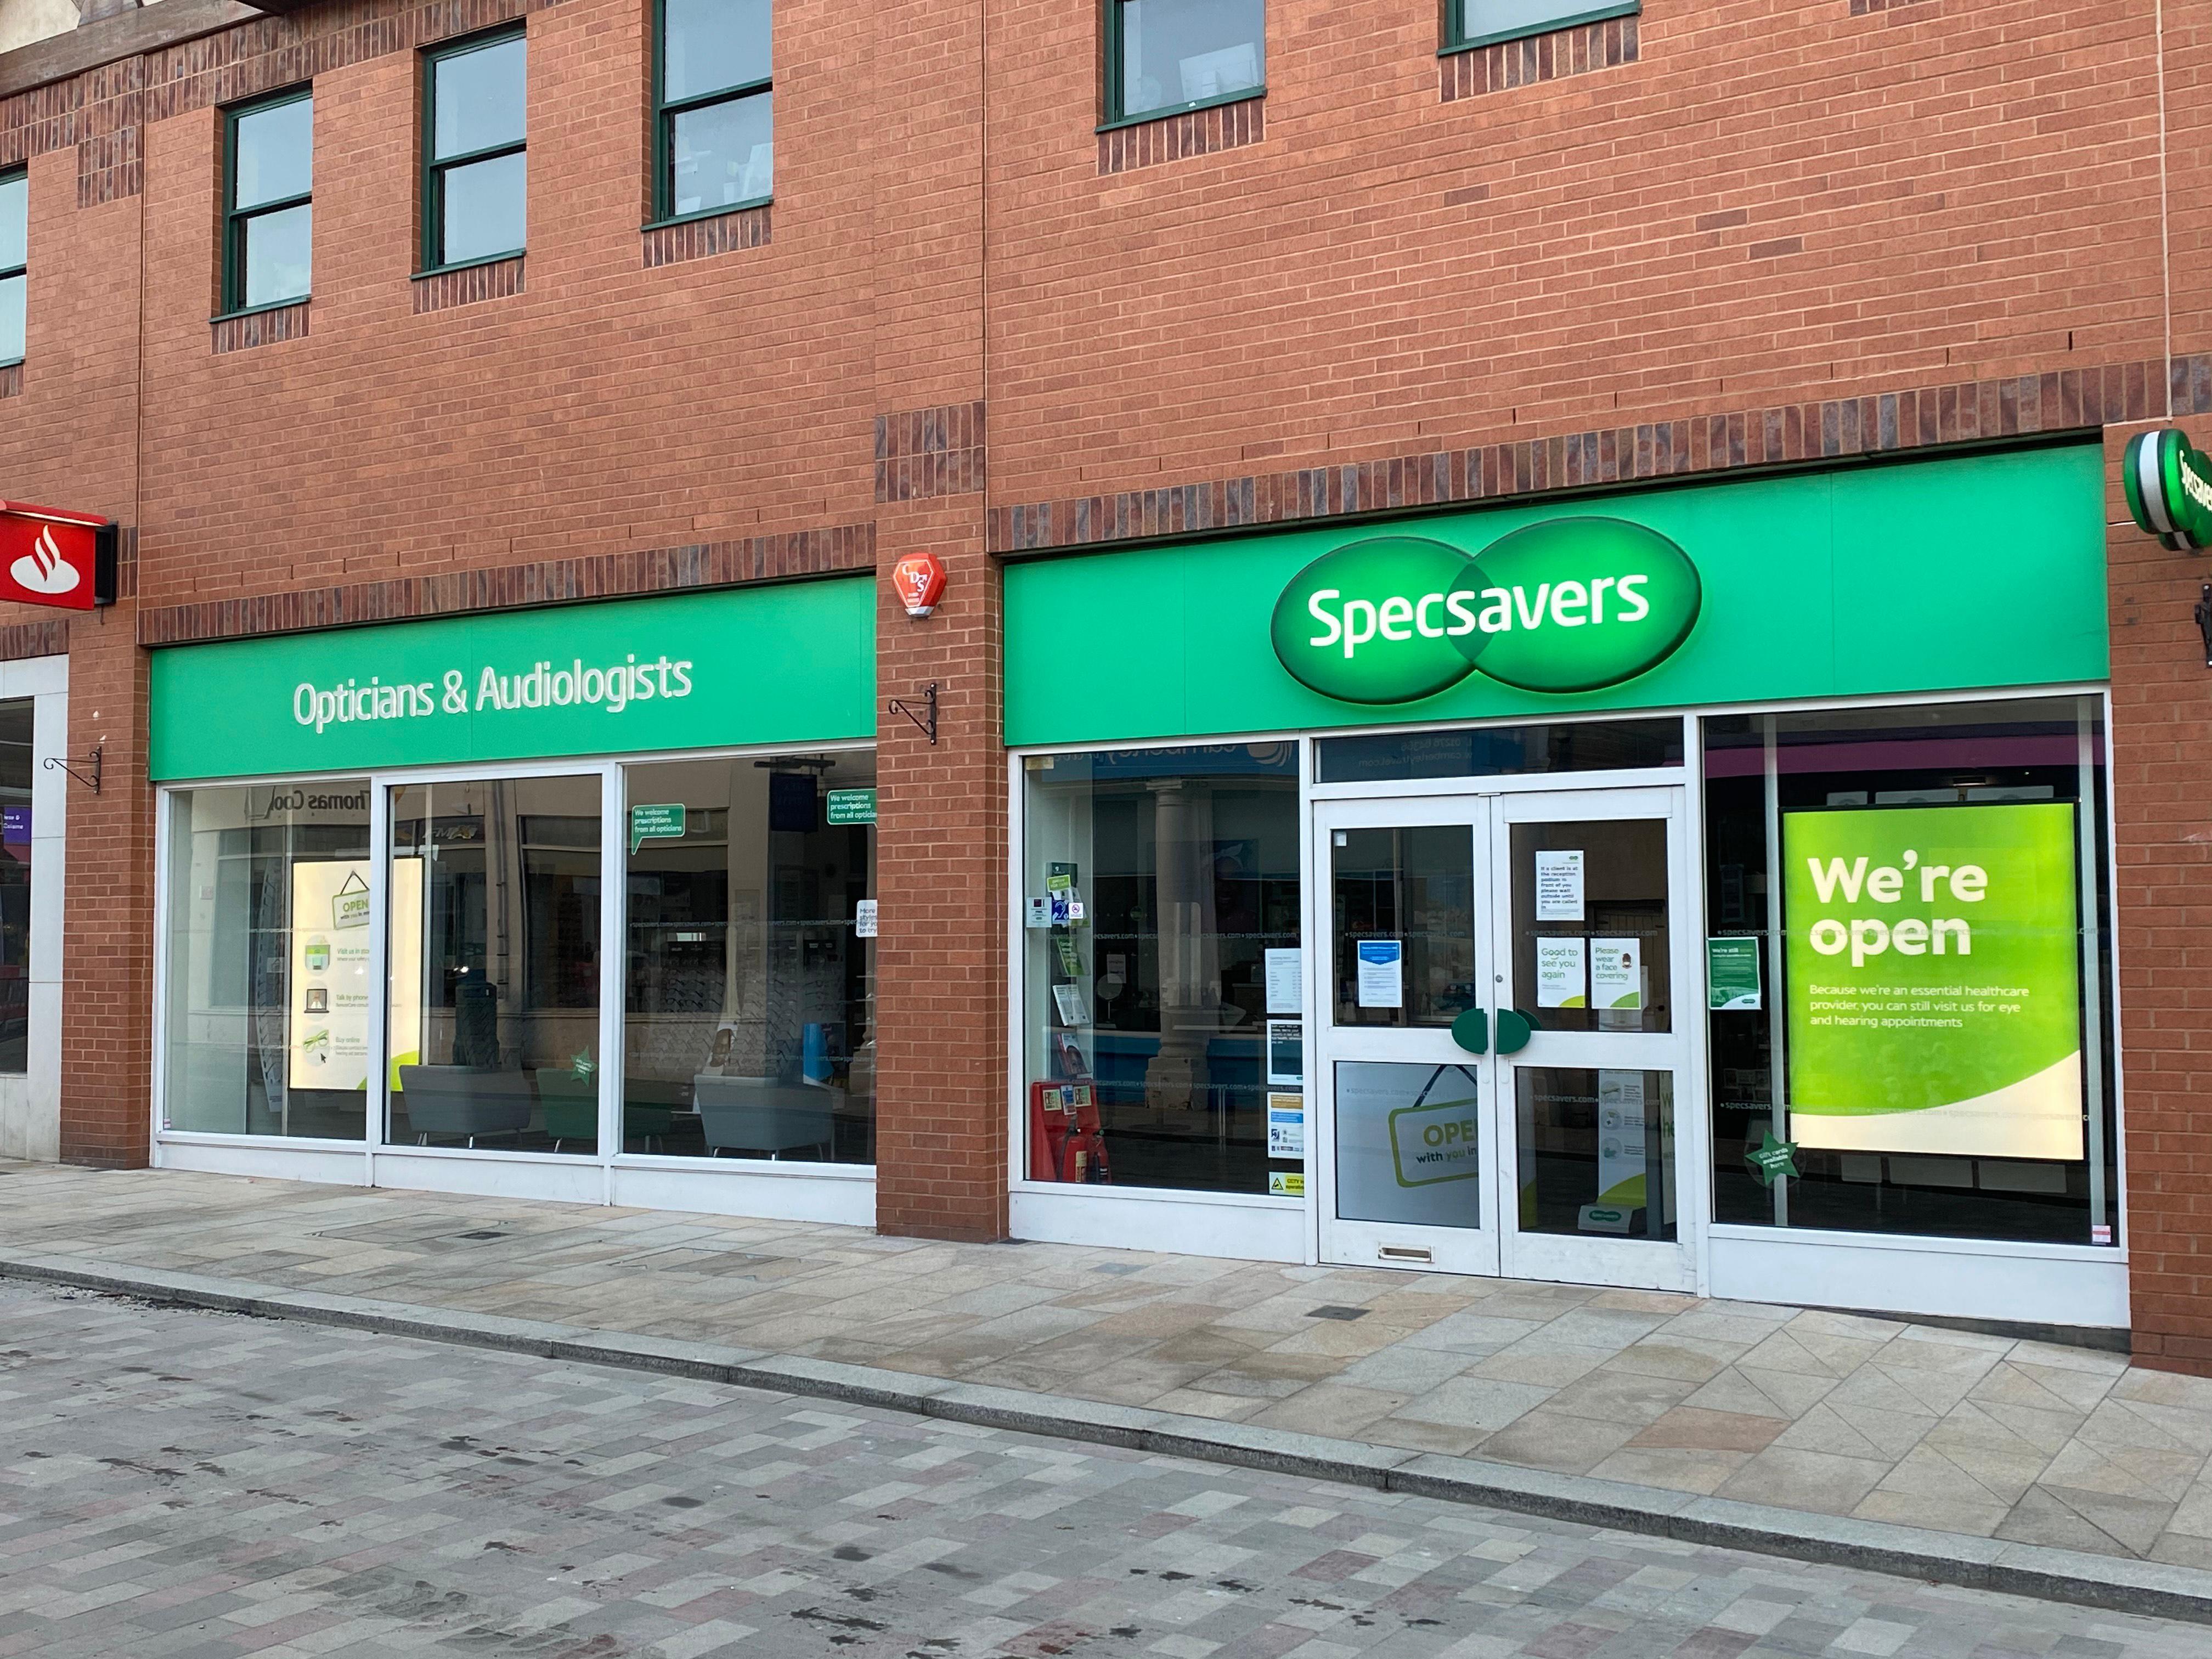 Specsavers Camberley exterior Specsavers Opticians and Audiologists - Camberley Camberley 01276 677686